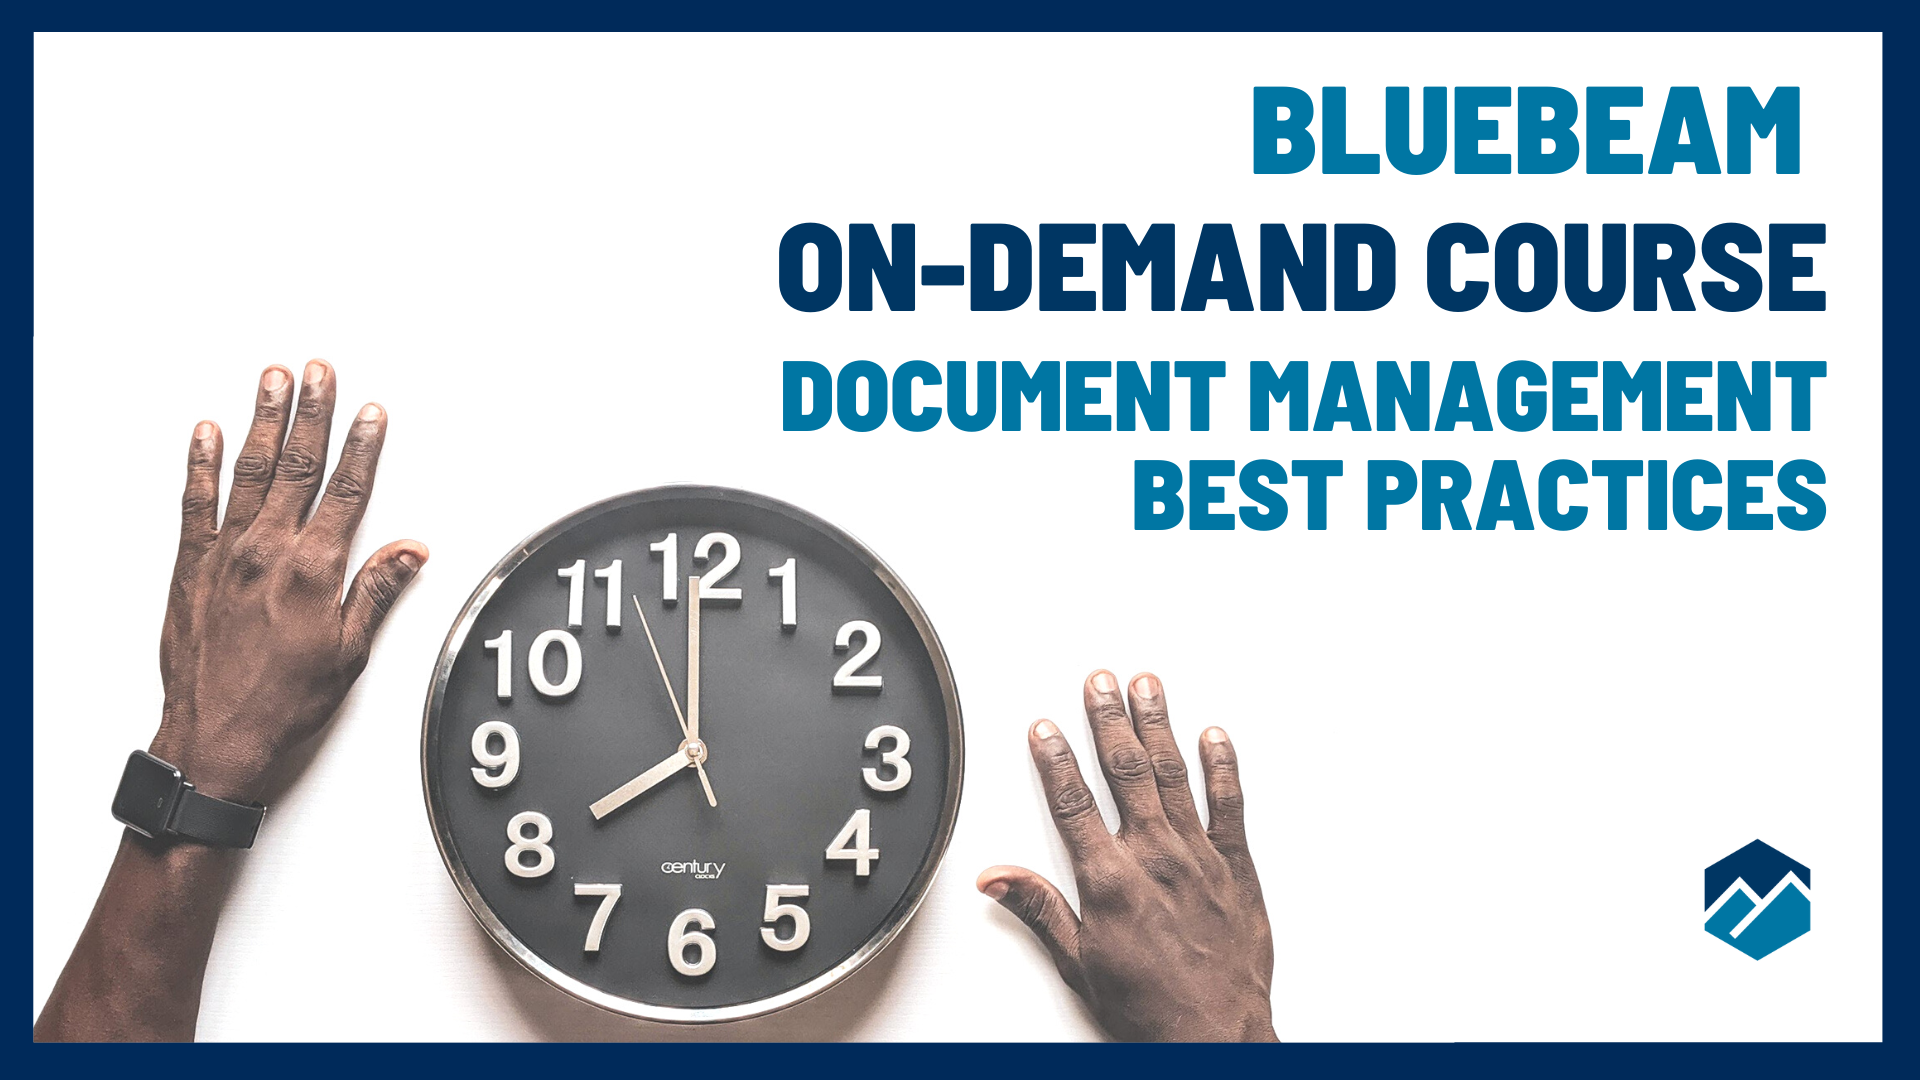 On Demand Course - Bluebeam Document Management Best Practices - UChapter2